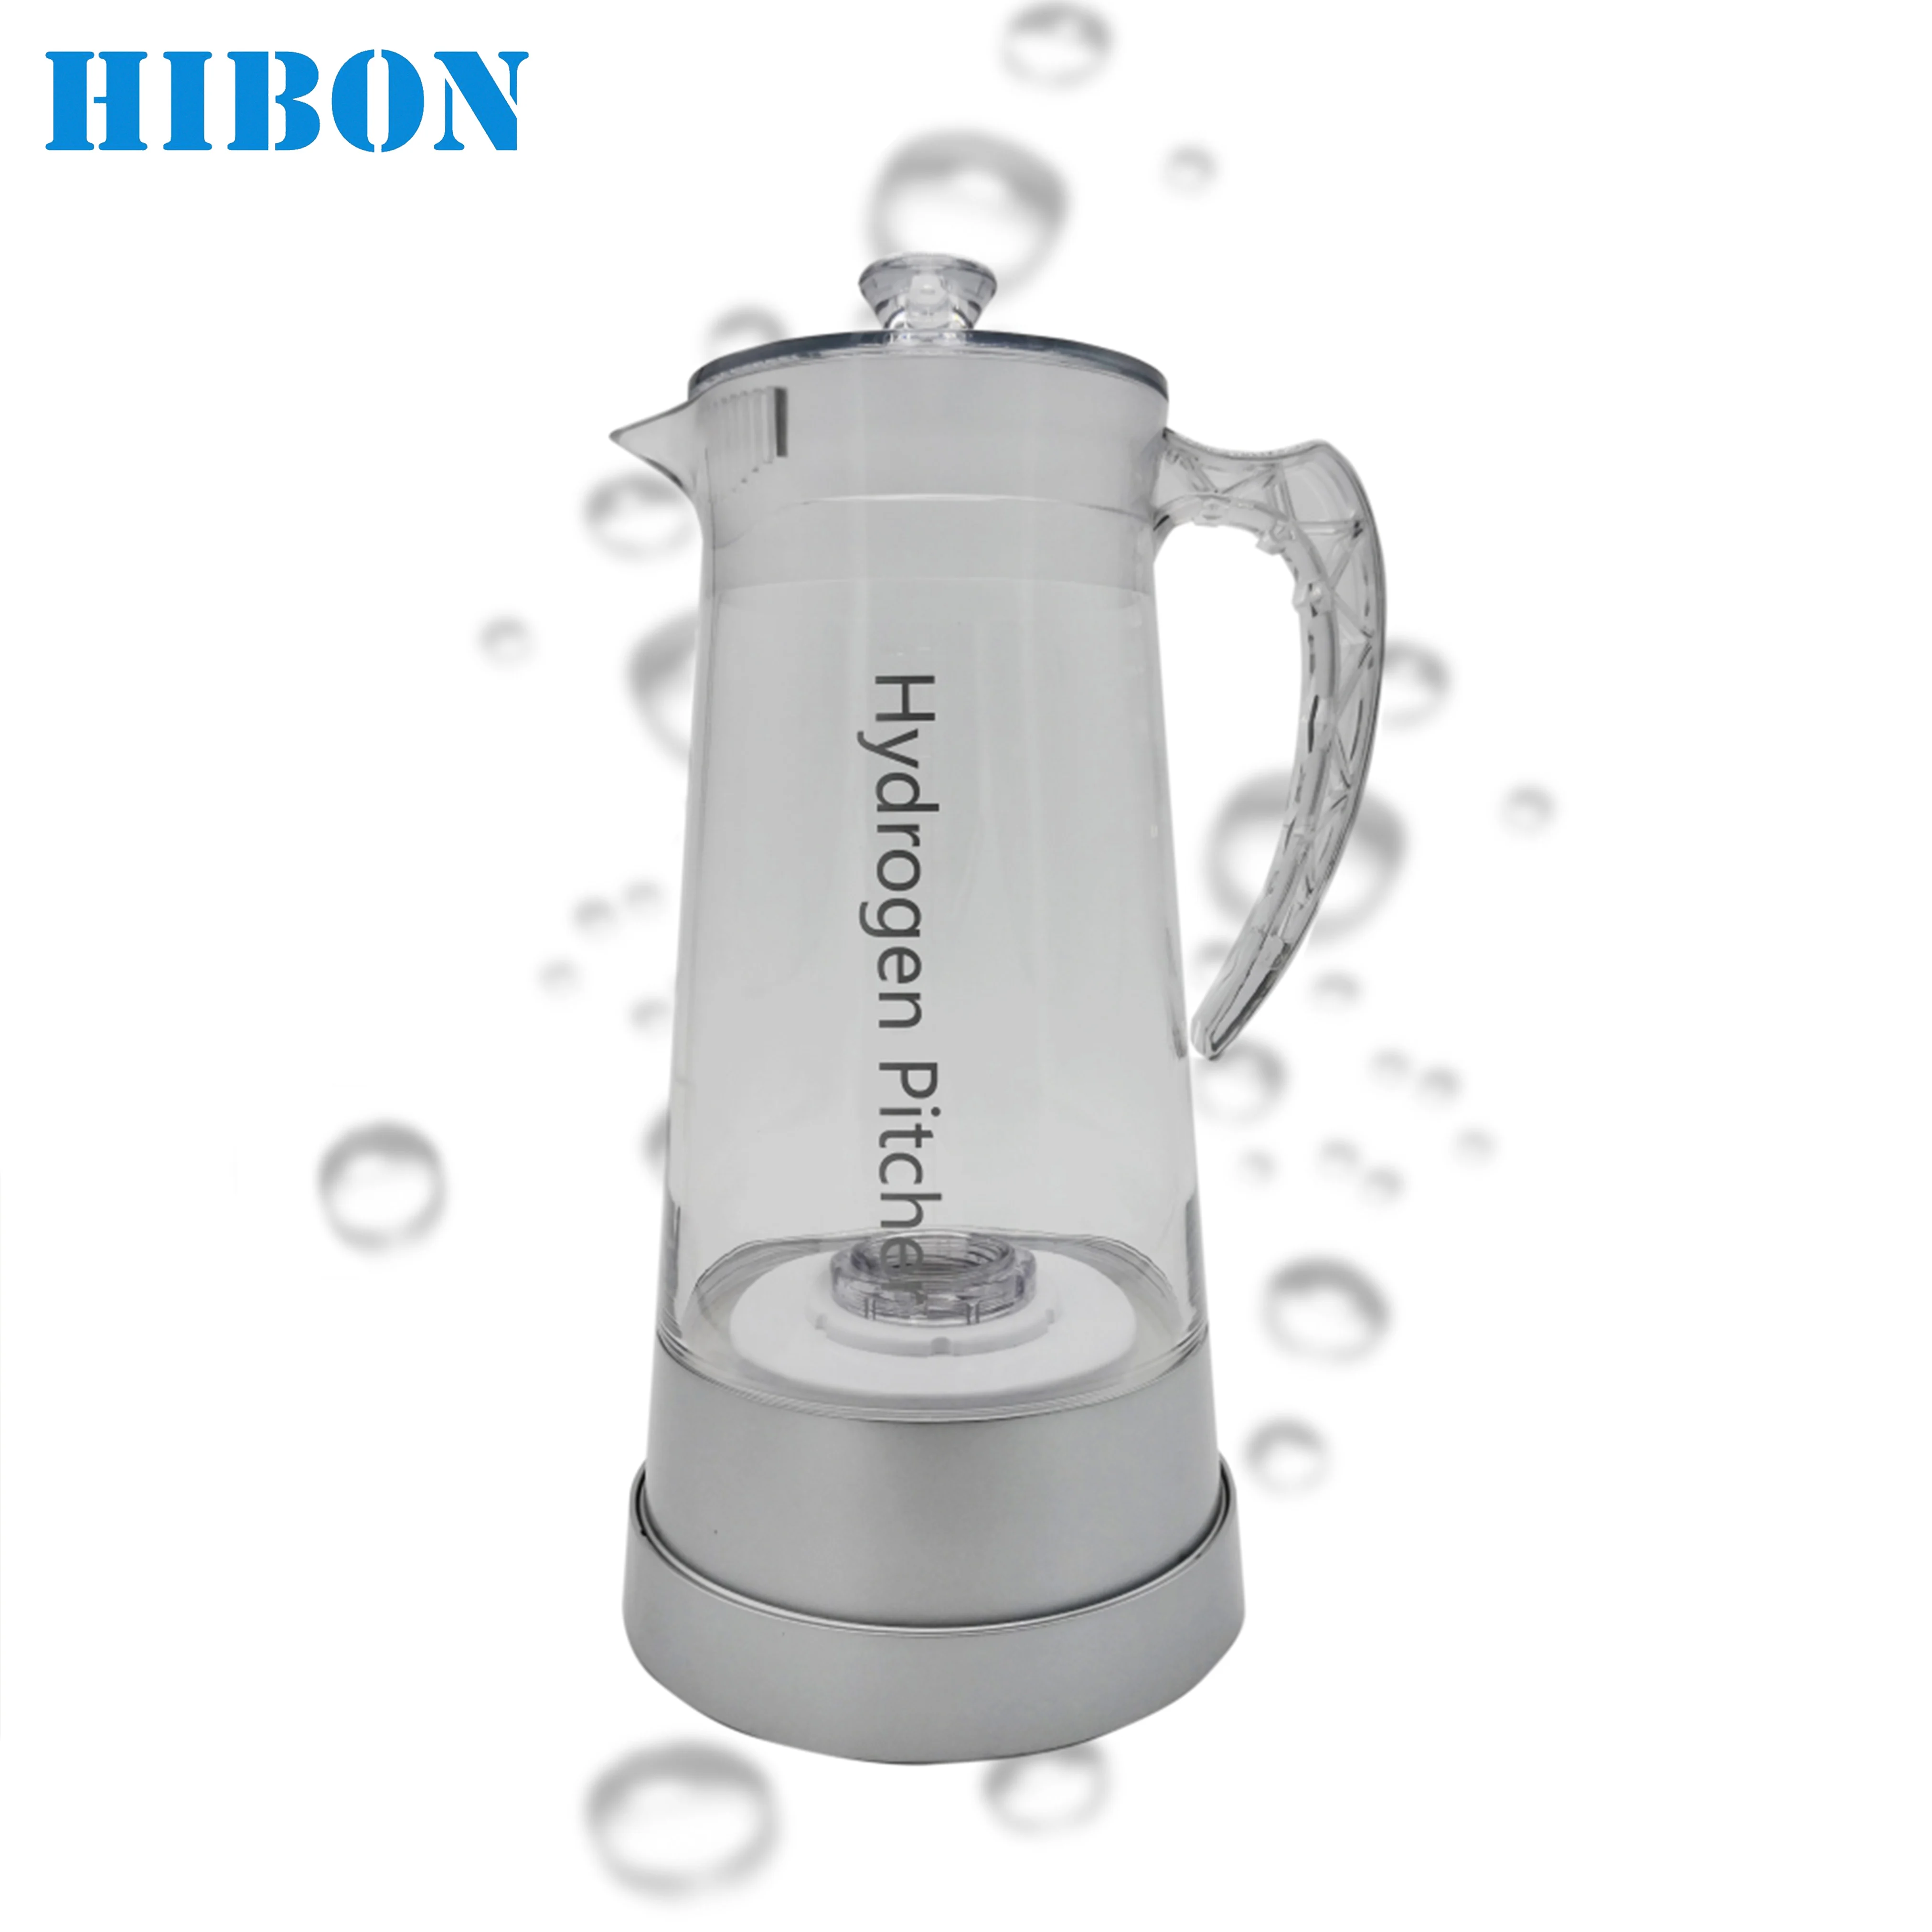 
Portable Hydrogen Water Pitcher Brand-new Design Frosted Square Kettle 